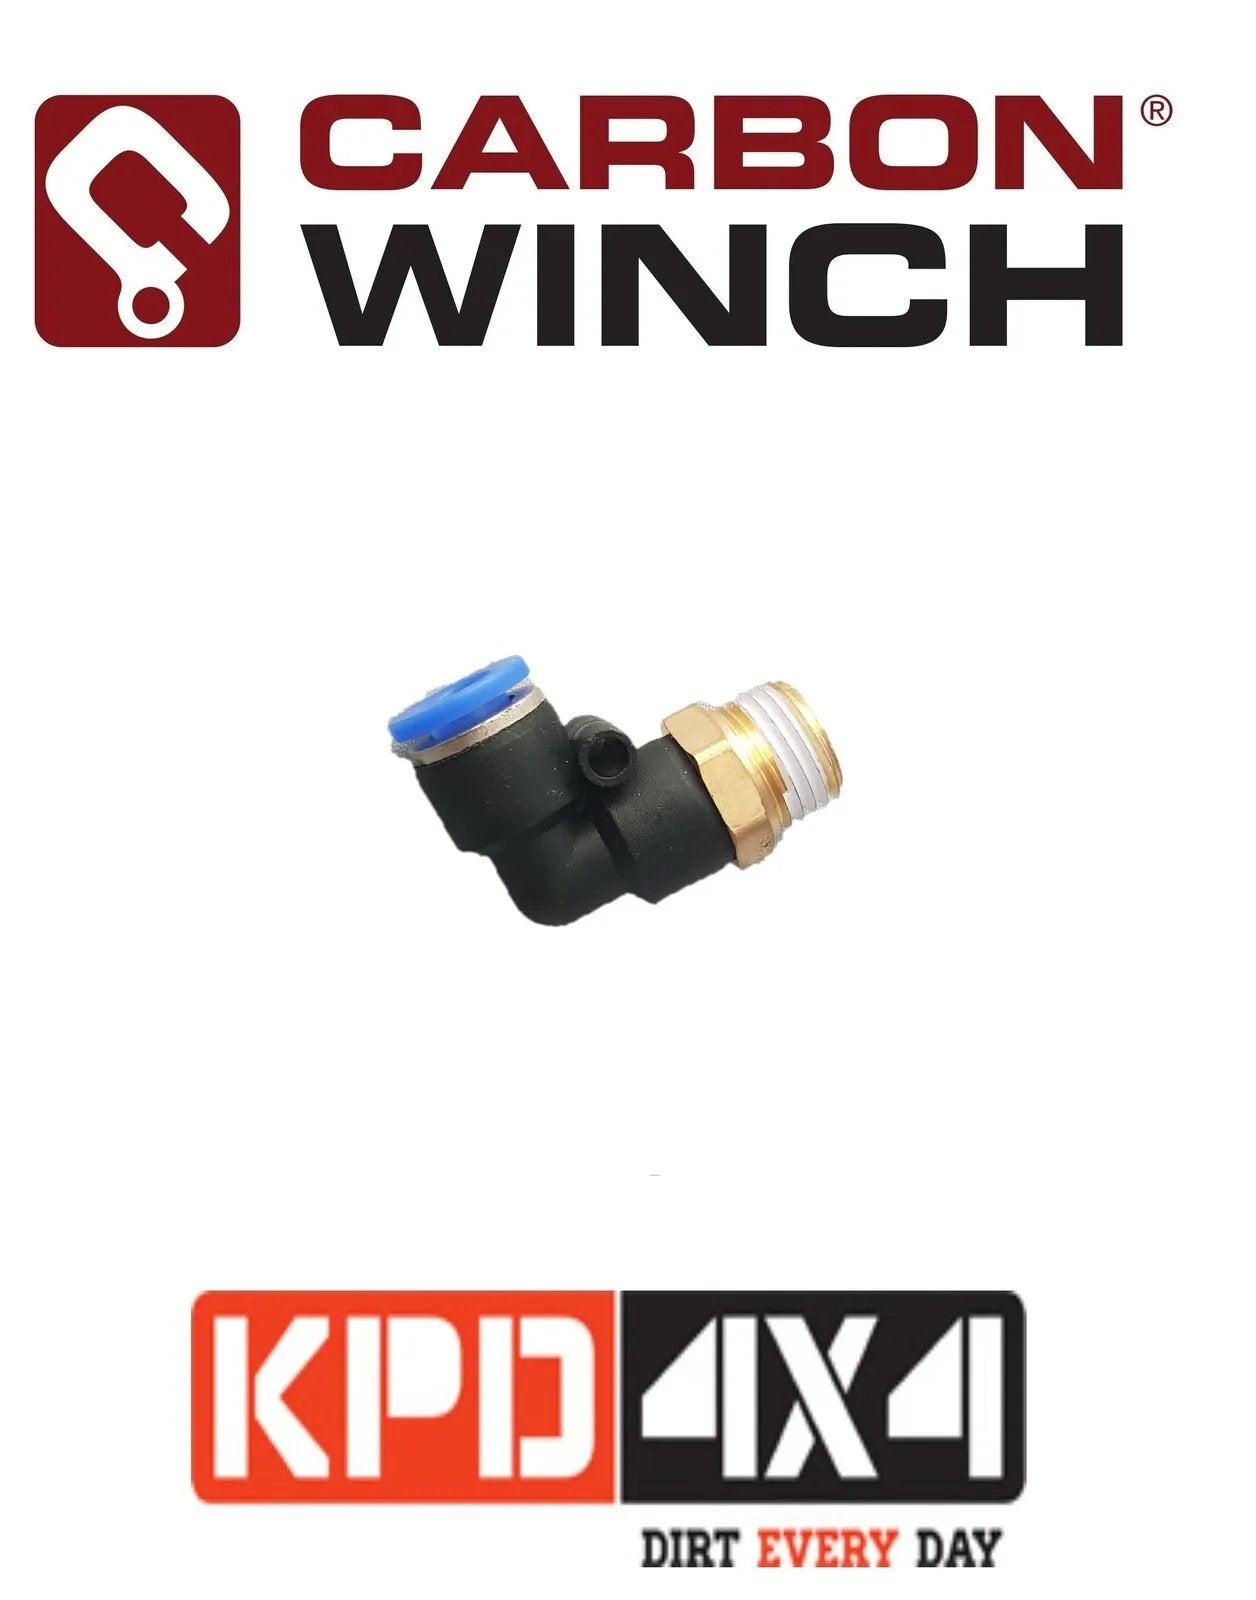 Carbon Winch Motor Breather Kit 90 Deg Elbow 1/4 NPT airline fitting - CW-BKEF 1